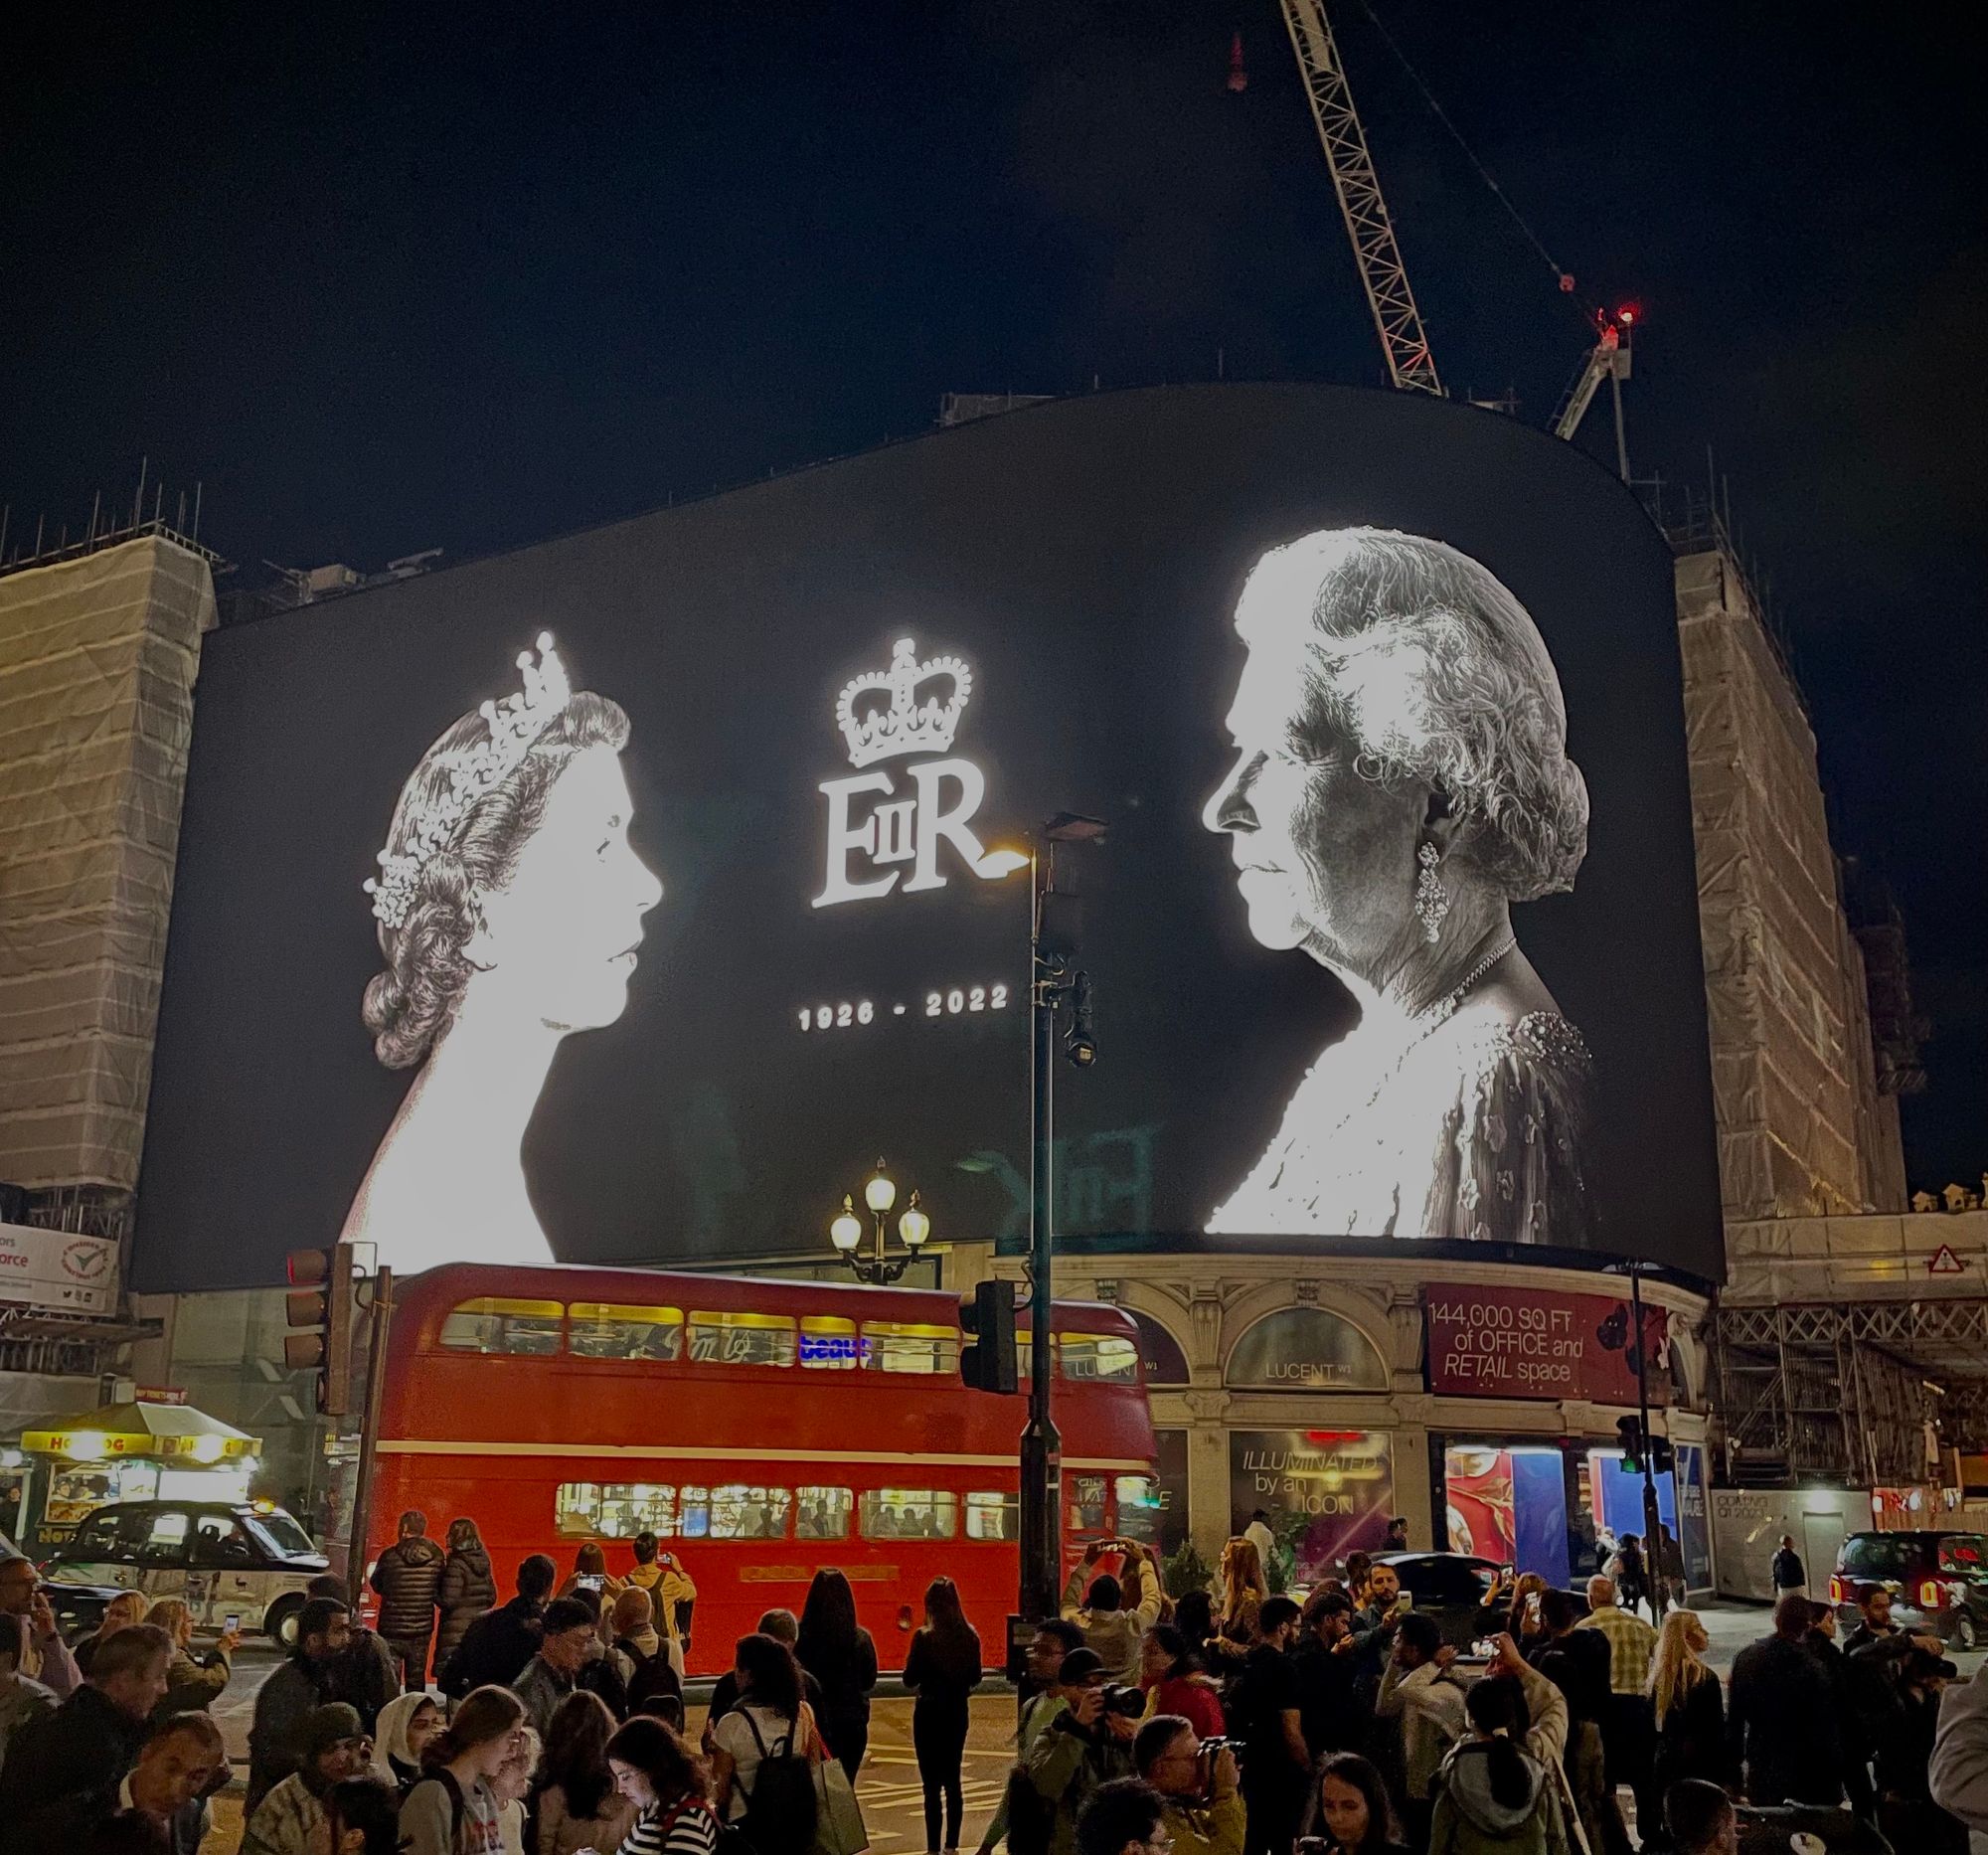 Piccadilly Circus showing the Queen on the news of her death in September 2022.